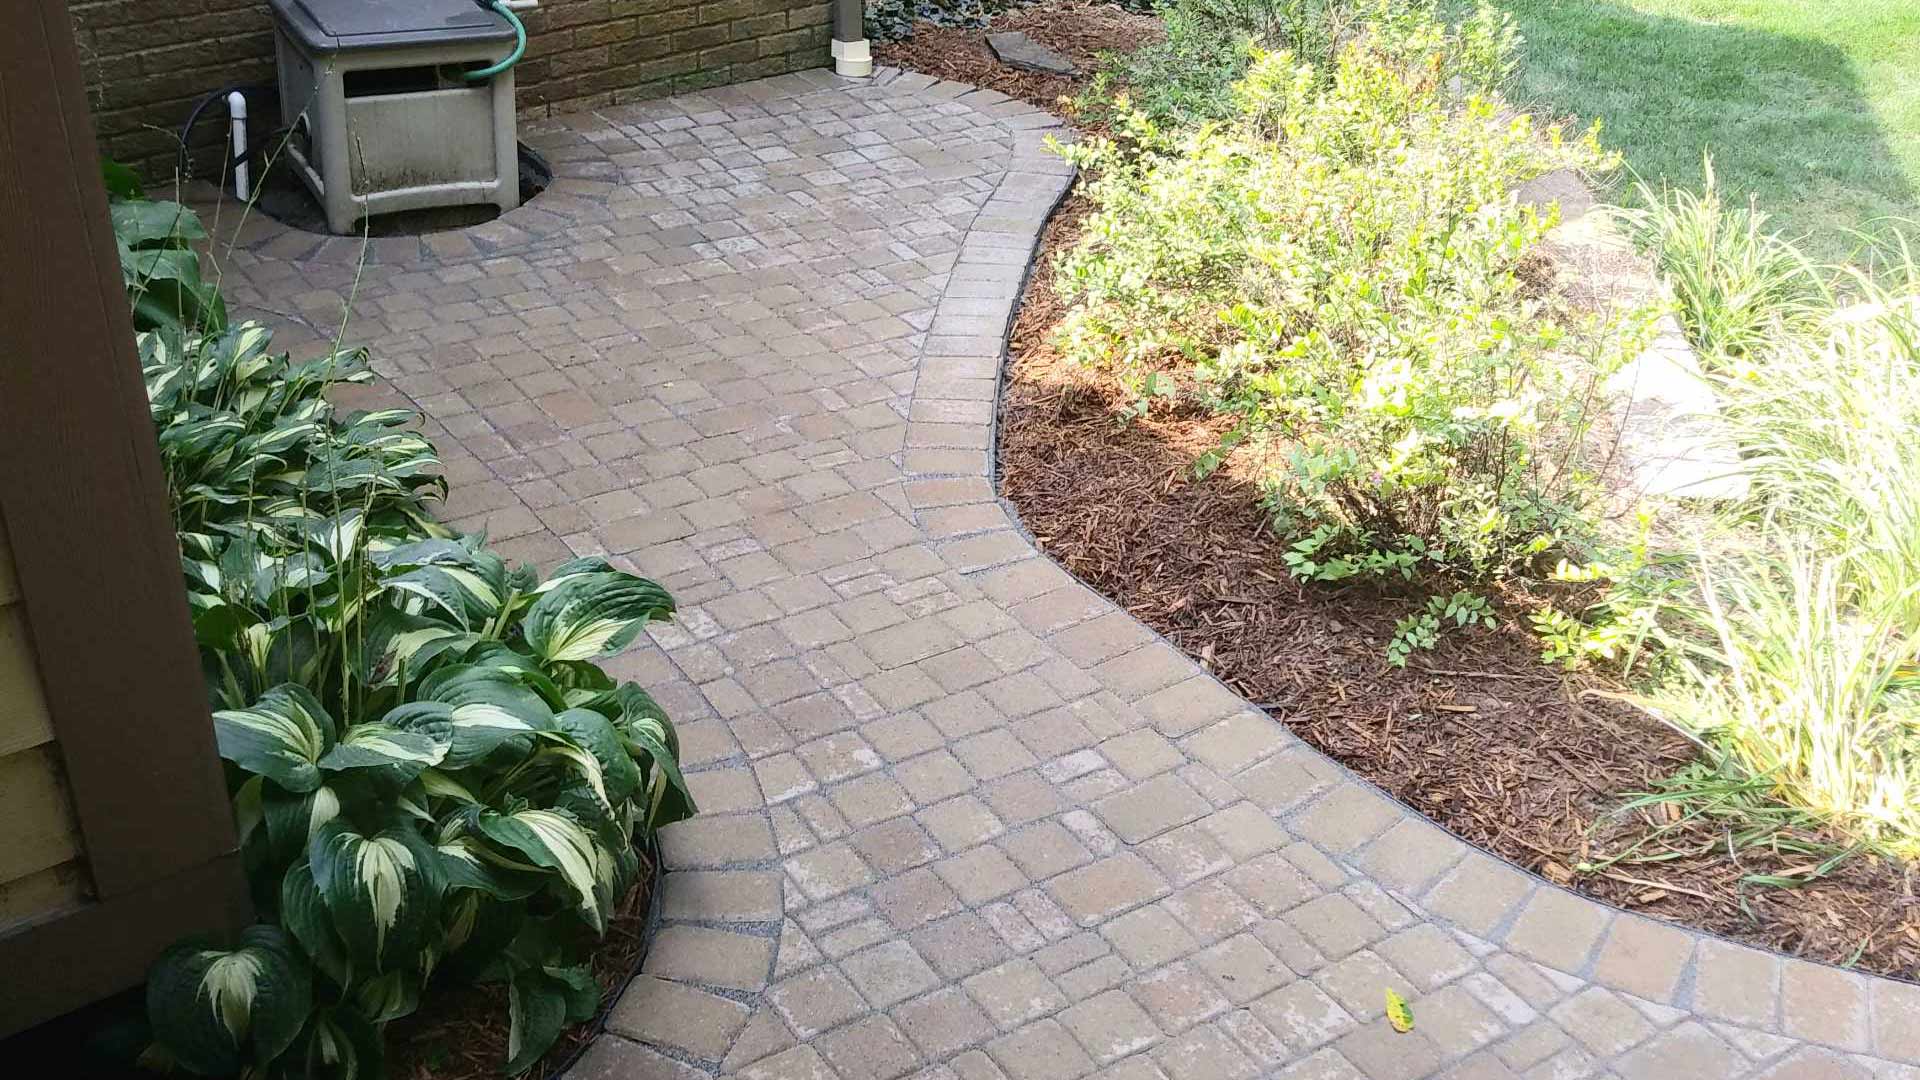 Walkway hardscape feature installed for property in Rochester, MI.